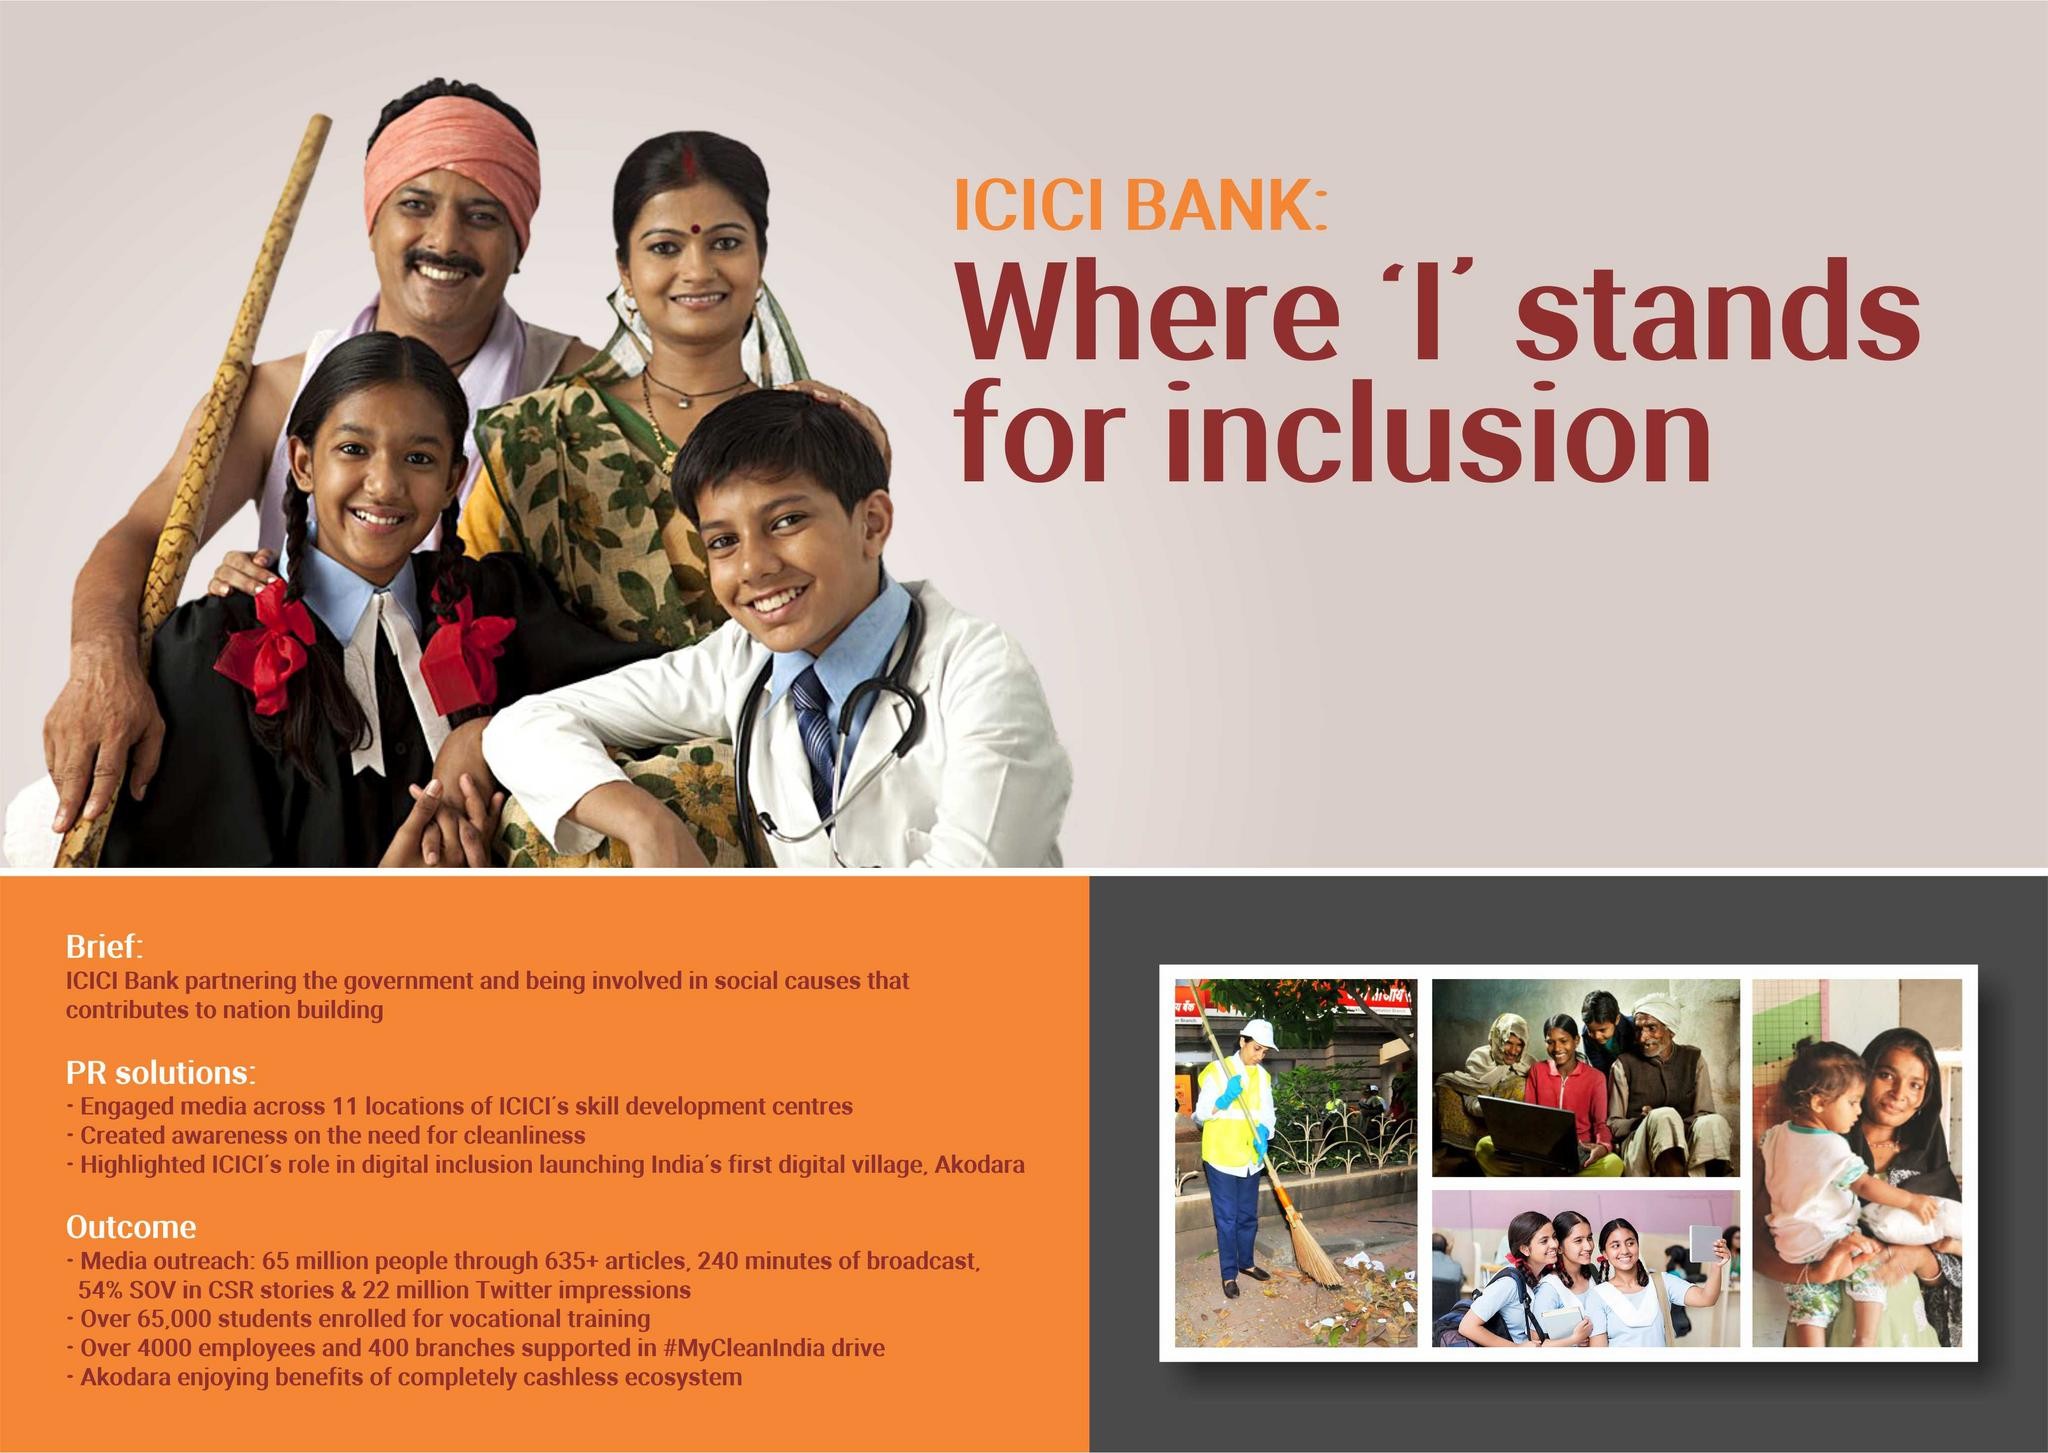 ICICI Bank: Where 'I' stands for inclusion